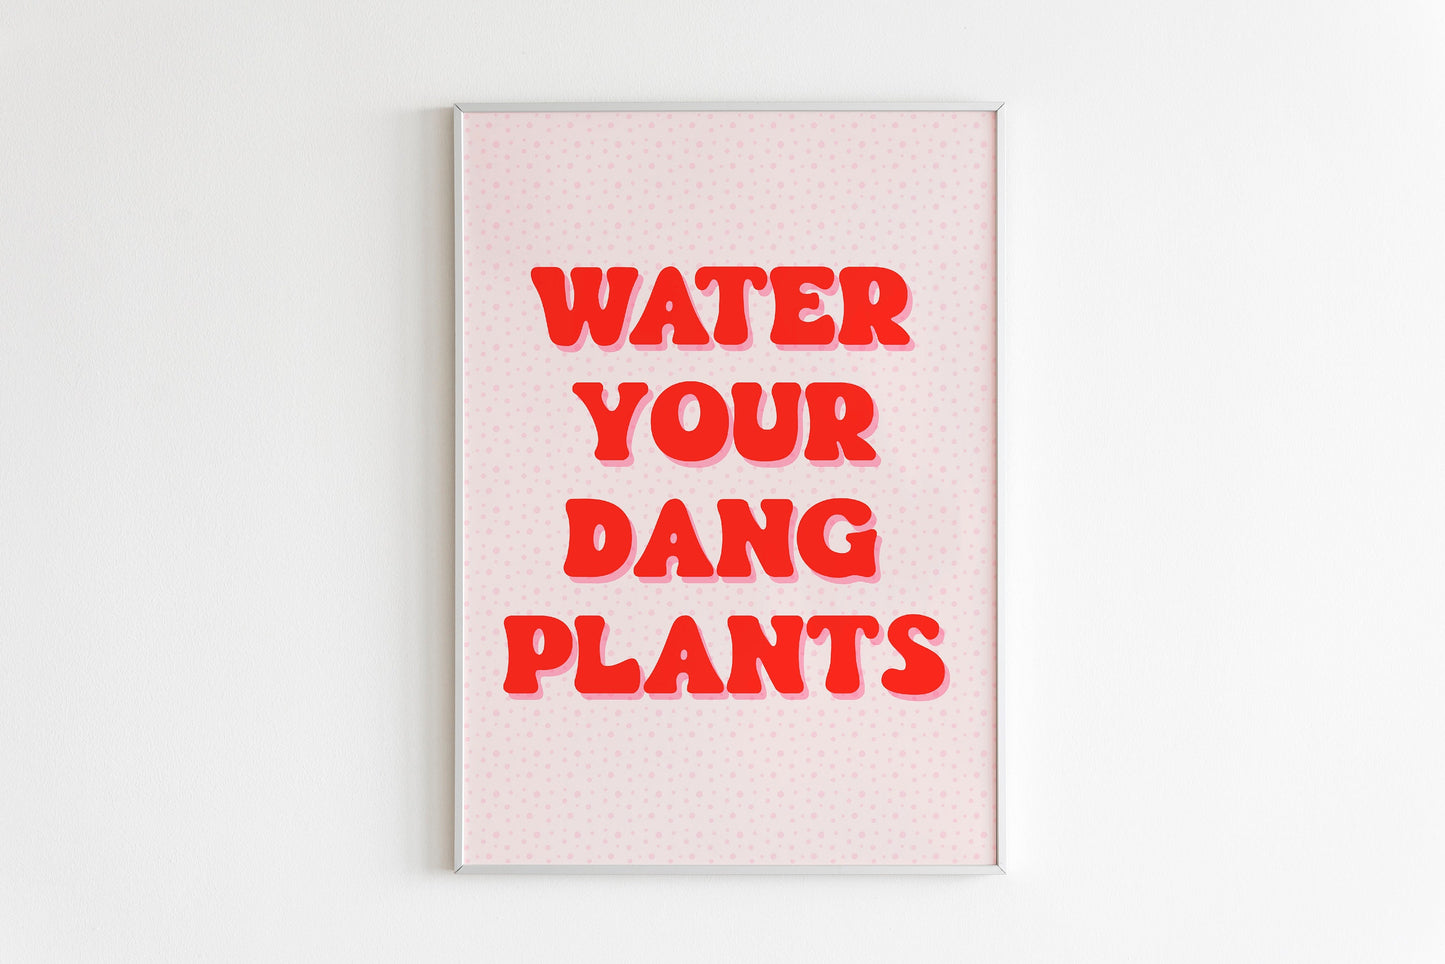 Water Your Dang Plants Print in Pink & Red